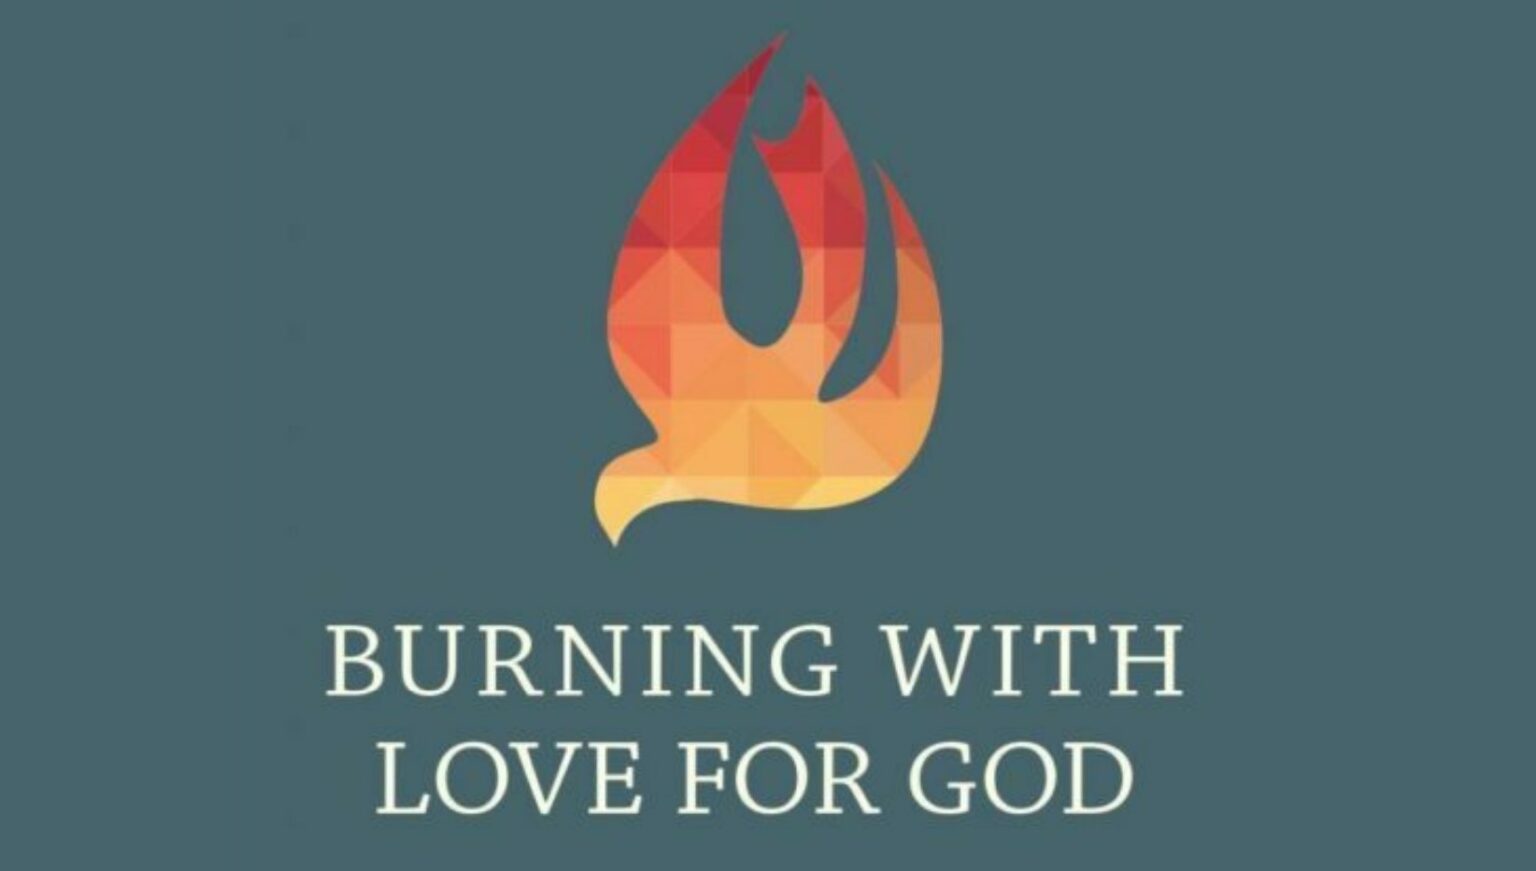 Burning with Love for God: A Guide to the Spiritual Exercises of St. Ignatius